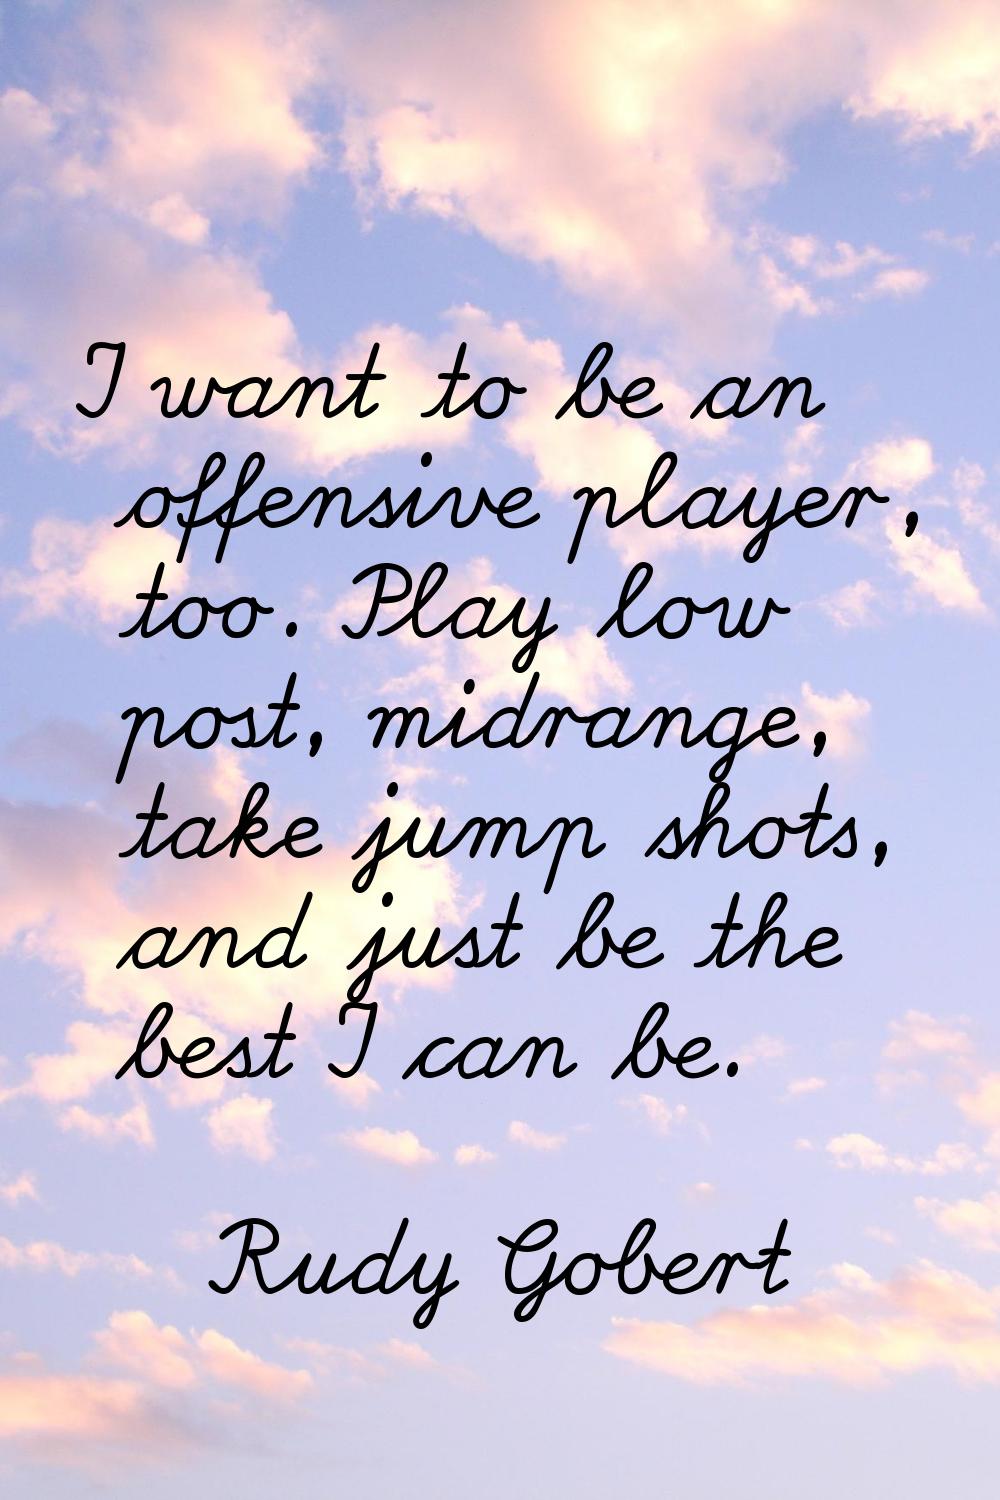 I want to be an offensive player, too. Play low post, midrange, take jump shots, and just be the be